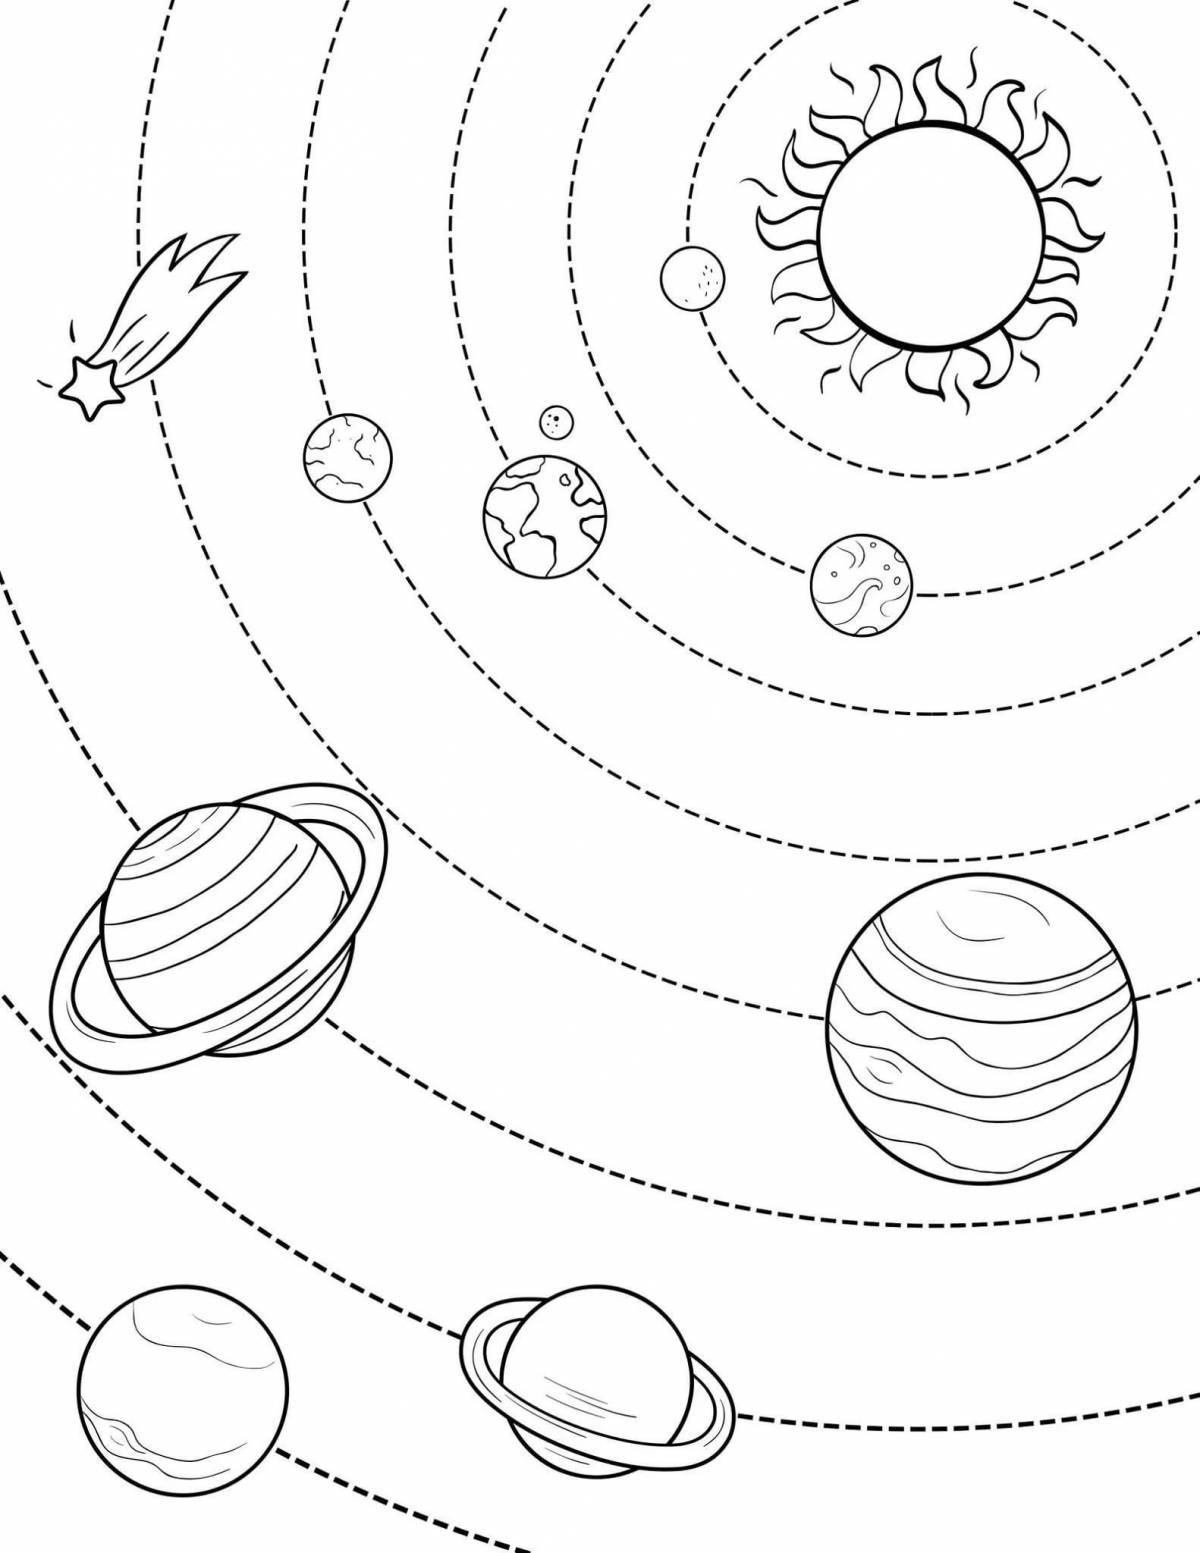 Creative planet coloring book for kids